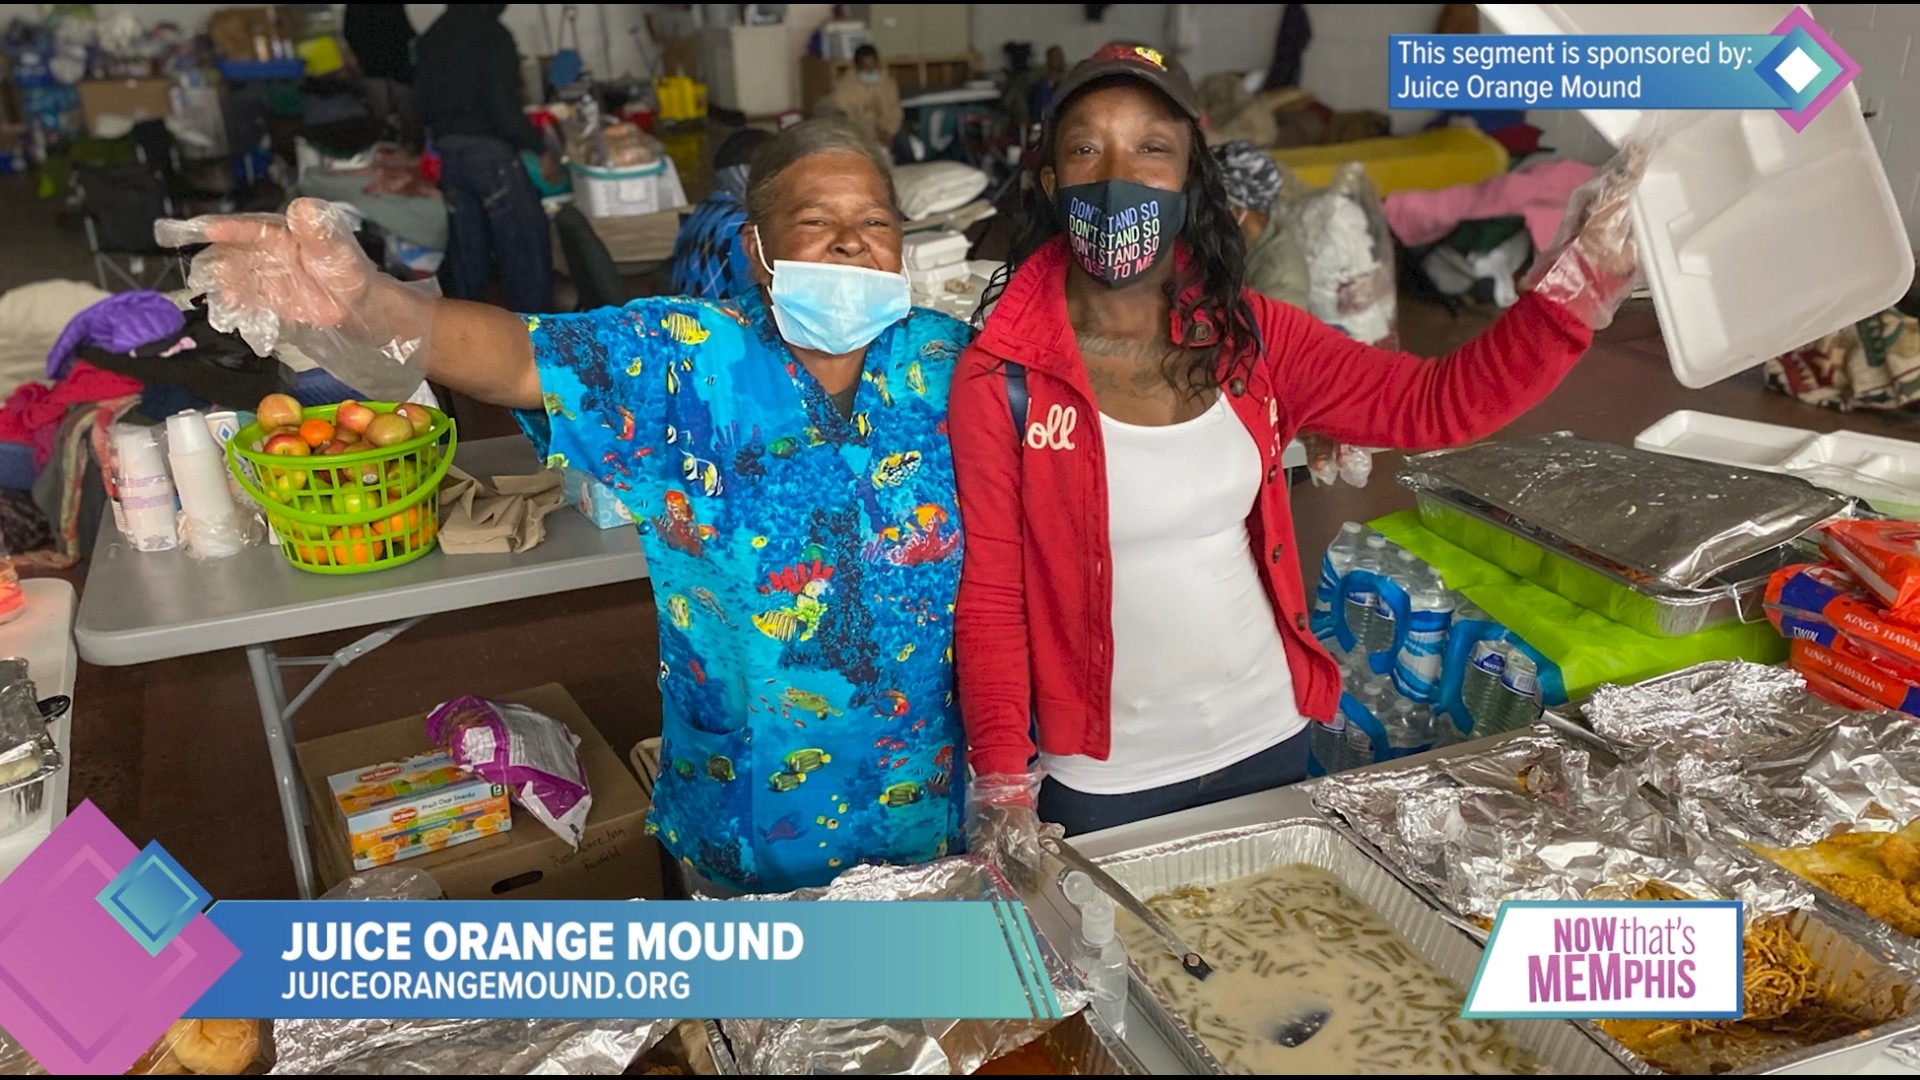 Britney Thorton founded Juice Orange Mound to act as a catalyst and help her neighborhood thrive. Projects like mowing vacant properties and helping the homeless.